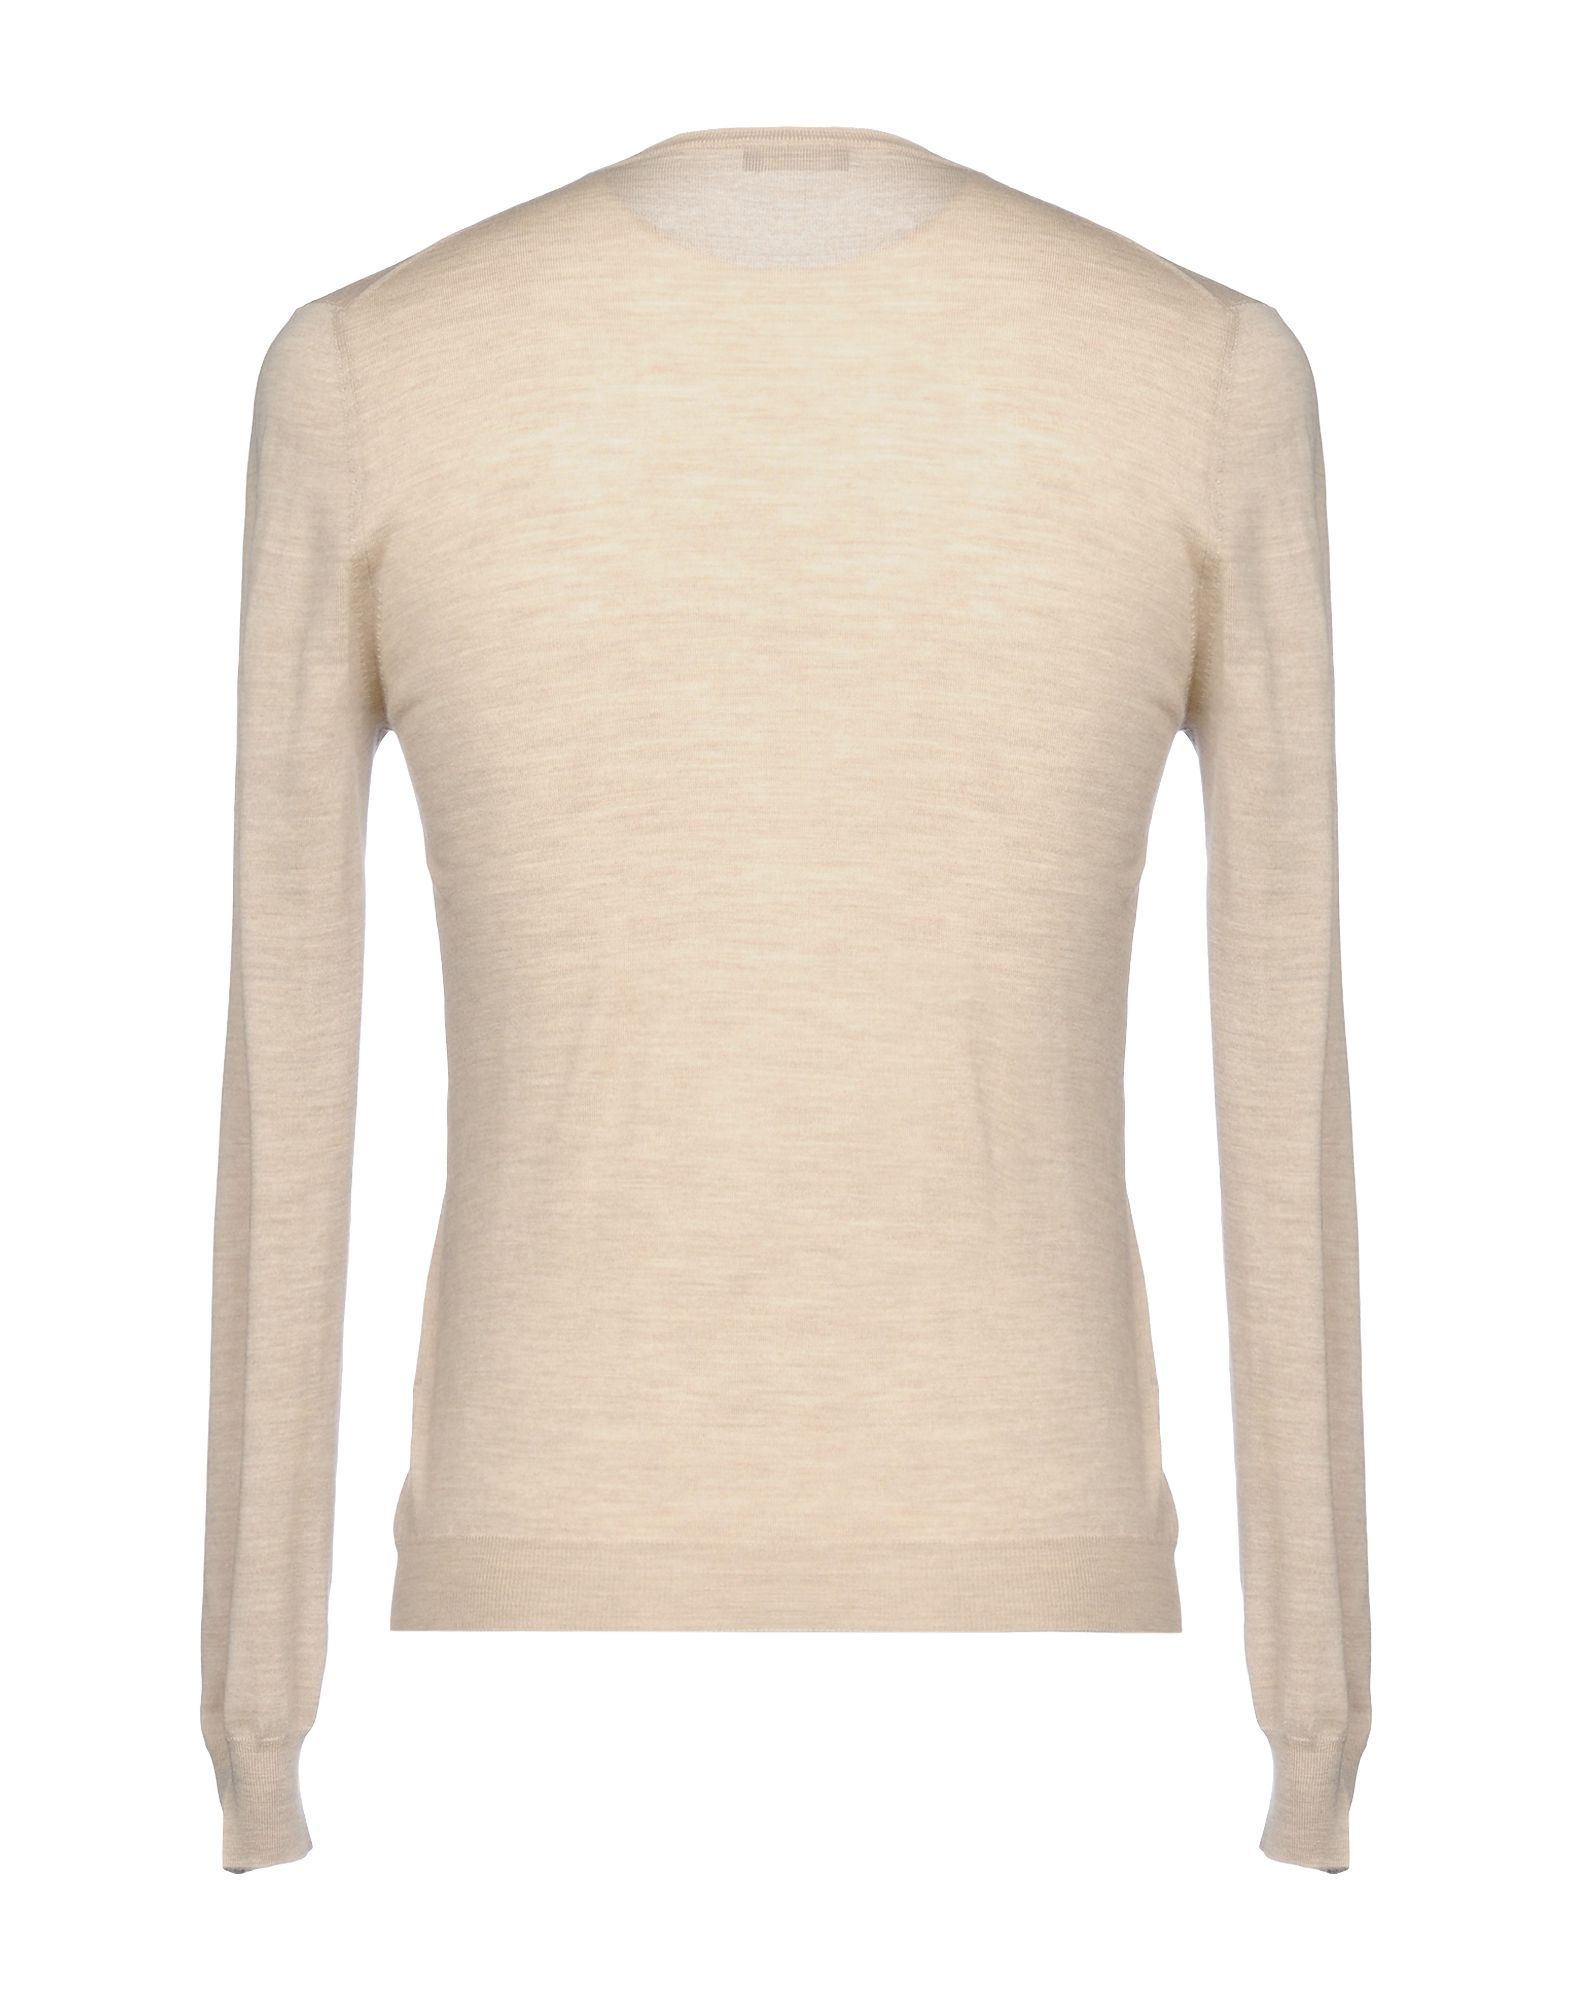 Knitted<br>No appliqu�s<br>Solid colour<br>Round collar<br>Lightweight knitted<br>Long sleeves<br>No pockets<br>